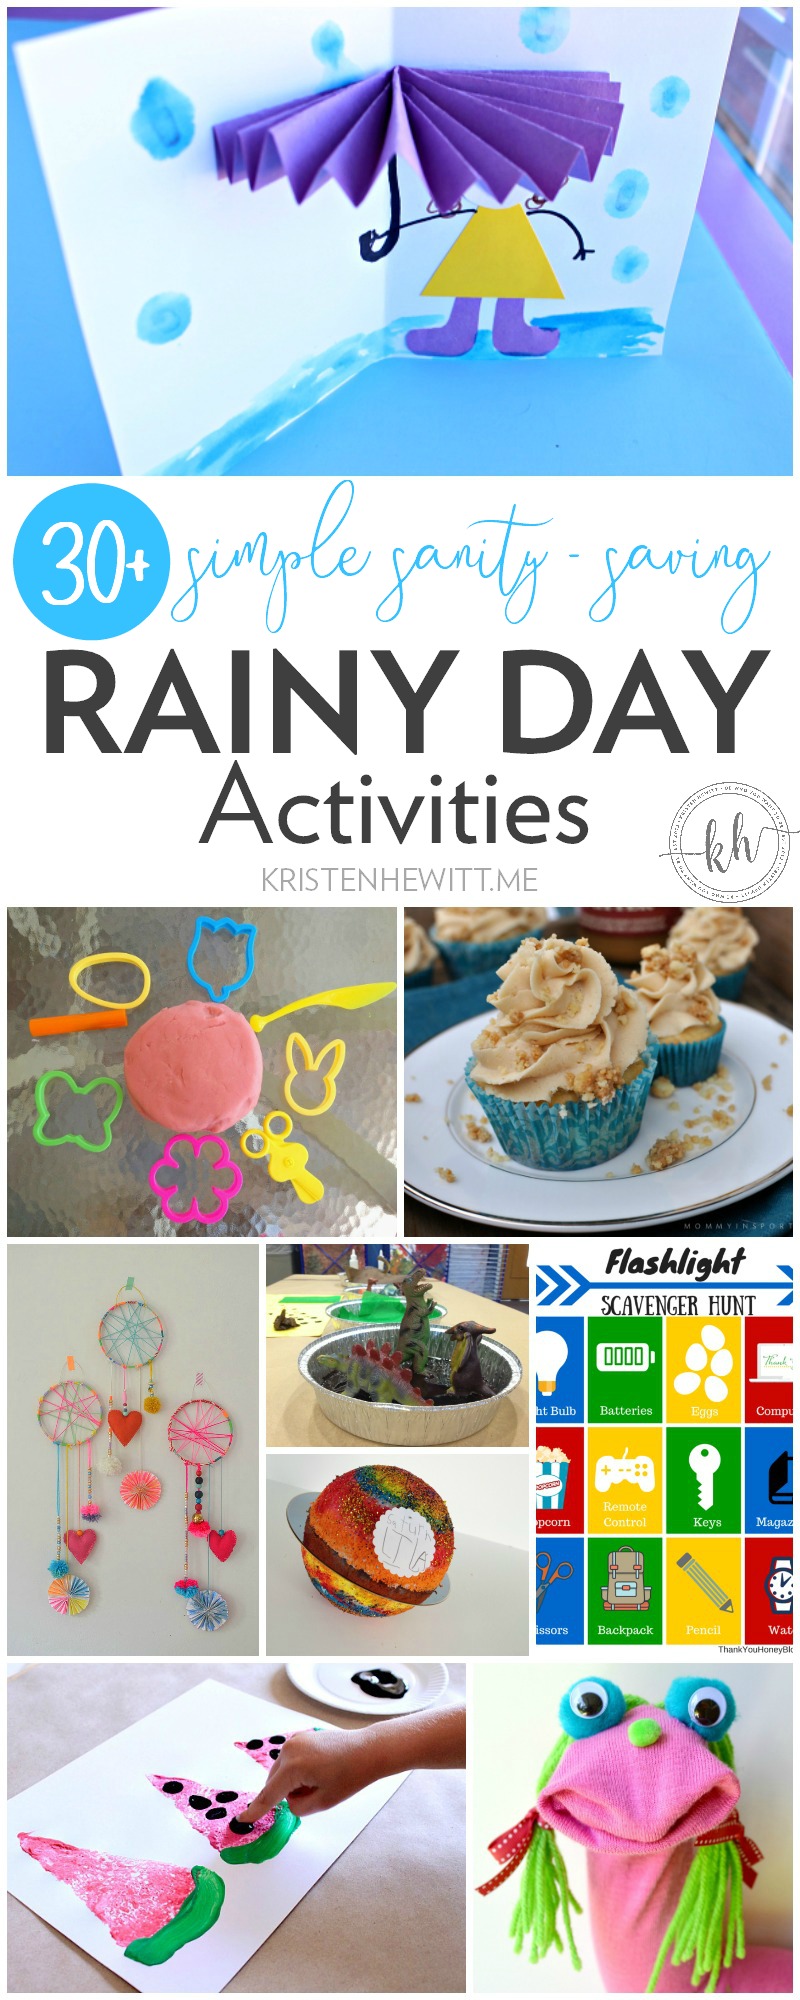 29 Rainy Day Activities for Kids & Toddlers - Tinybeans